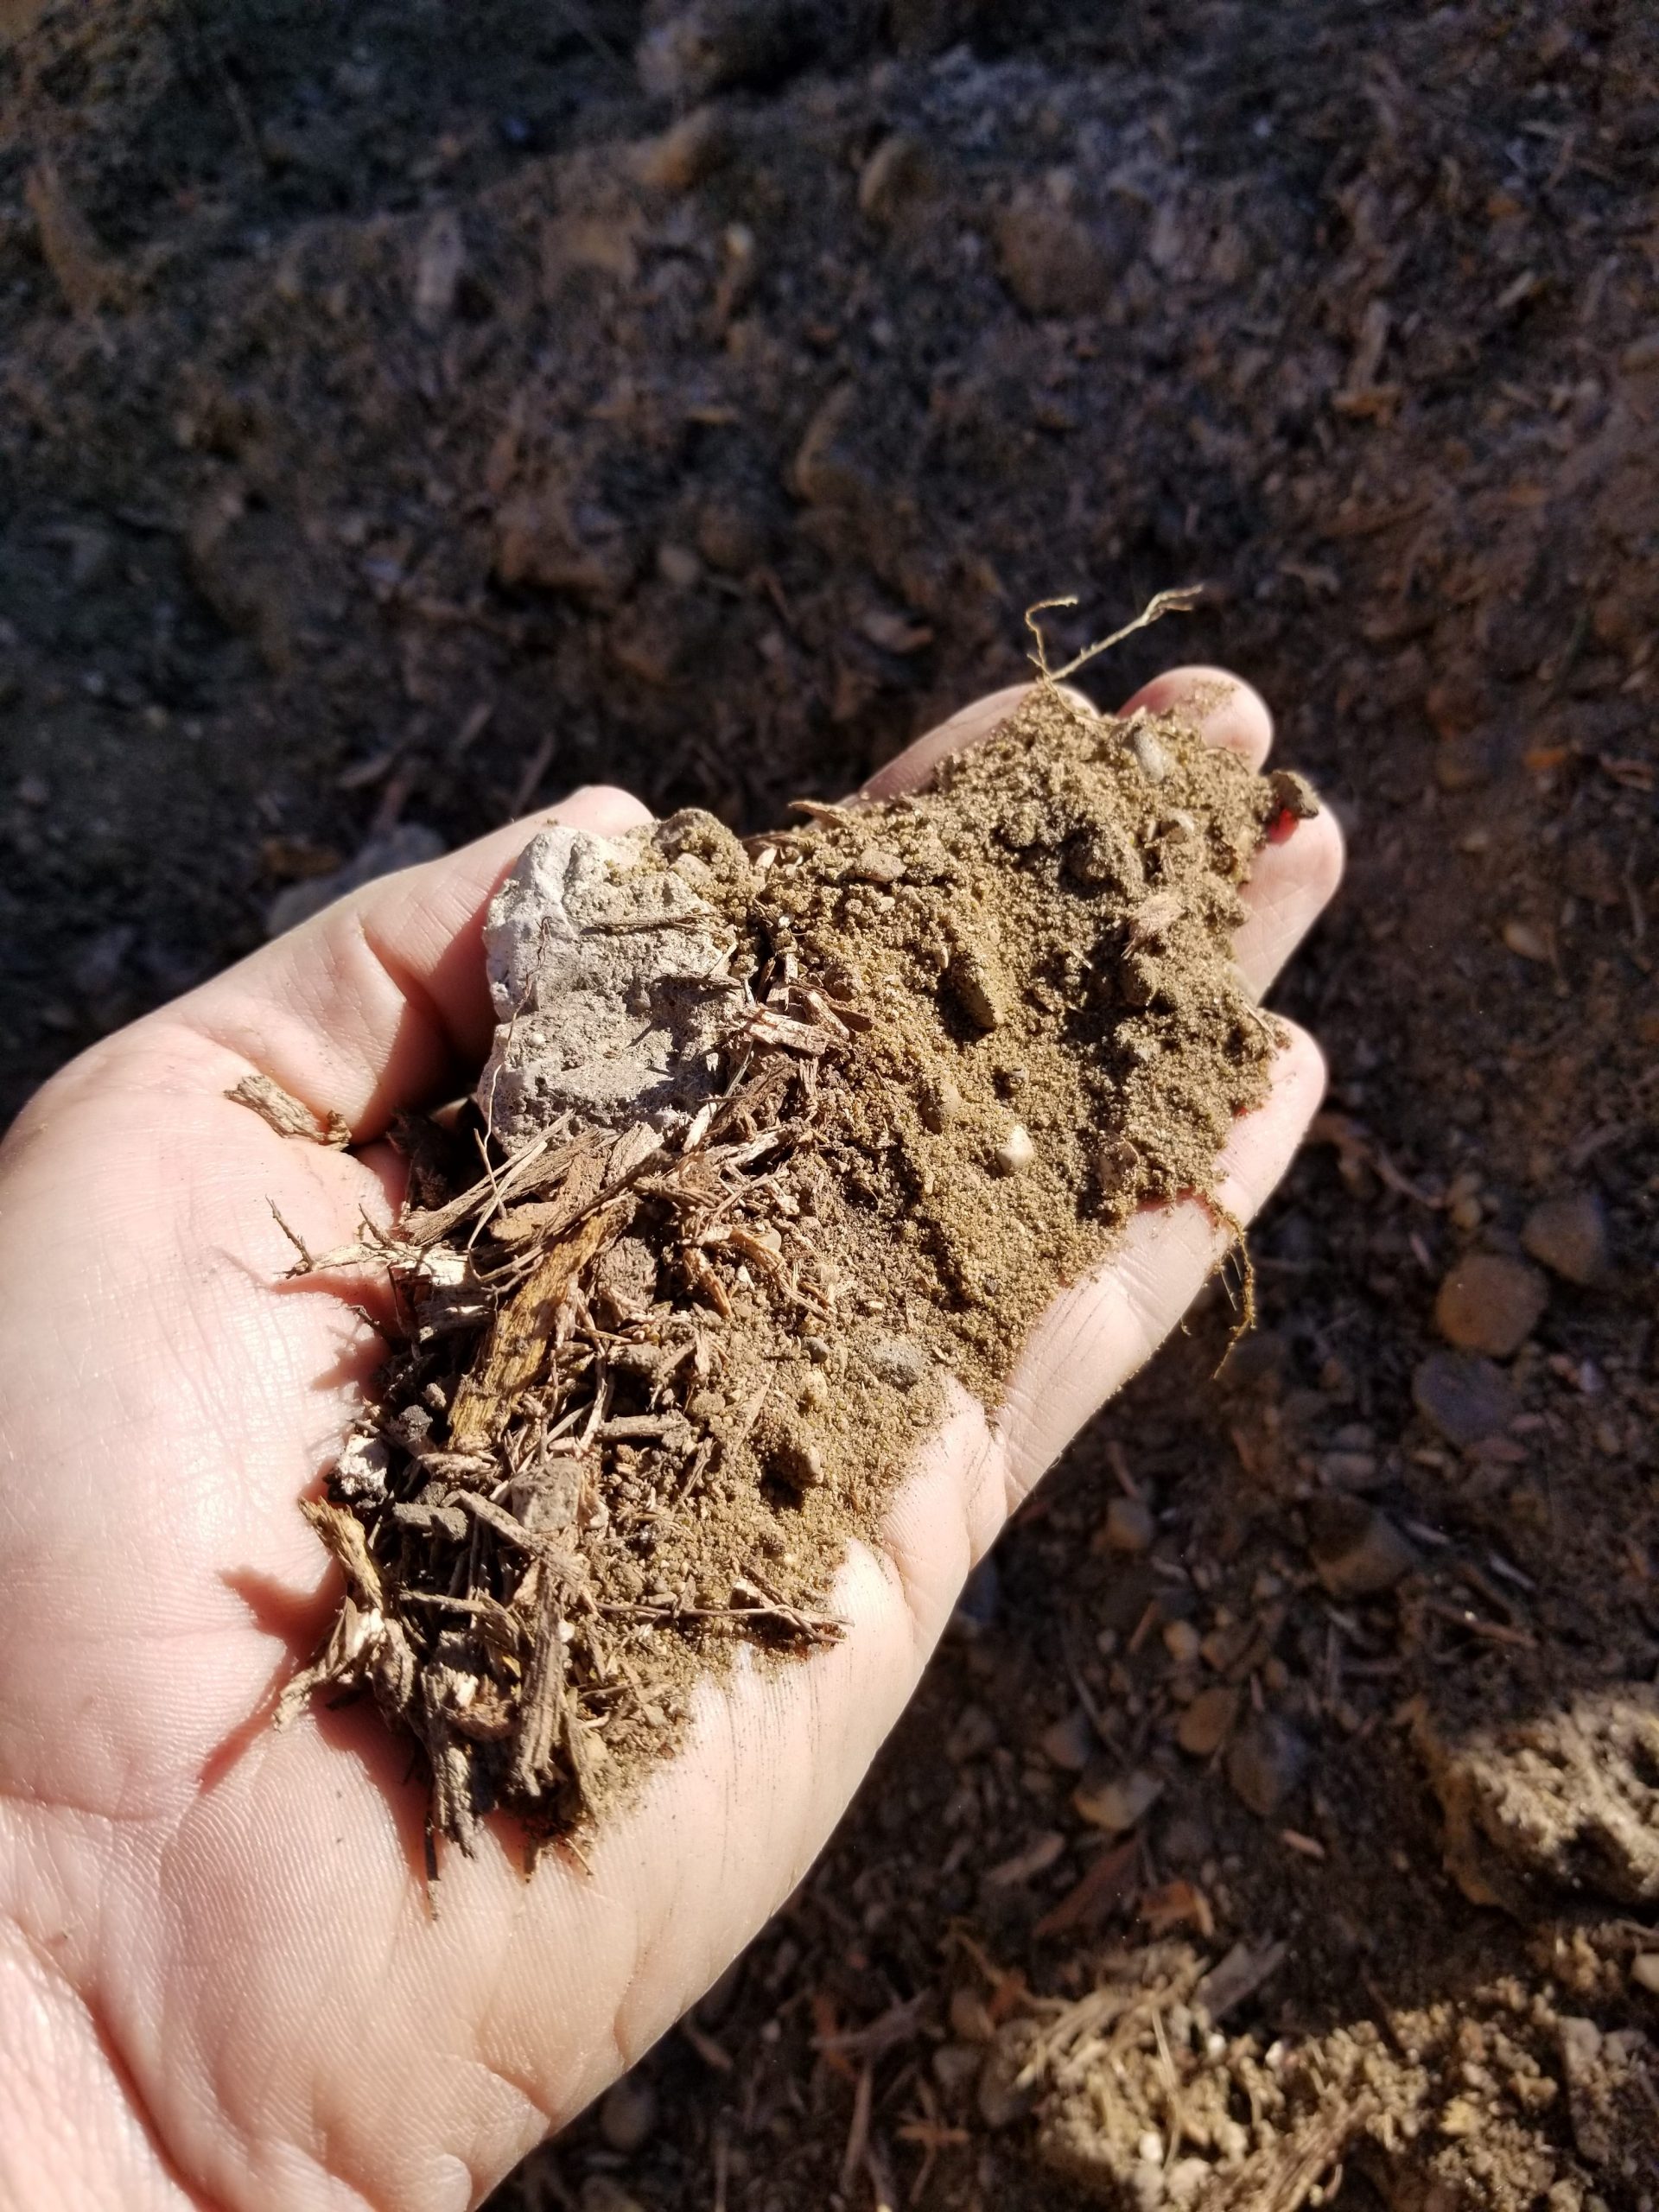 Unscreened Fill Dirt/Sand